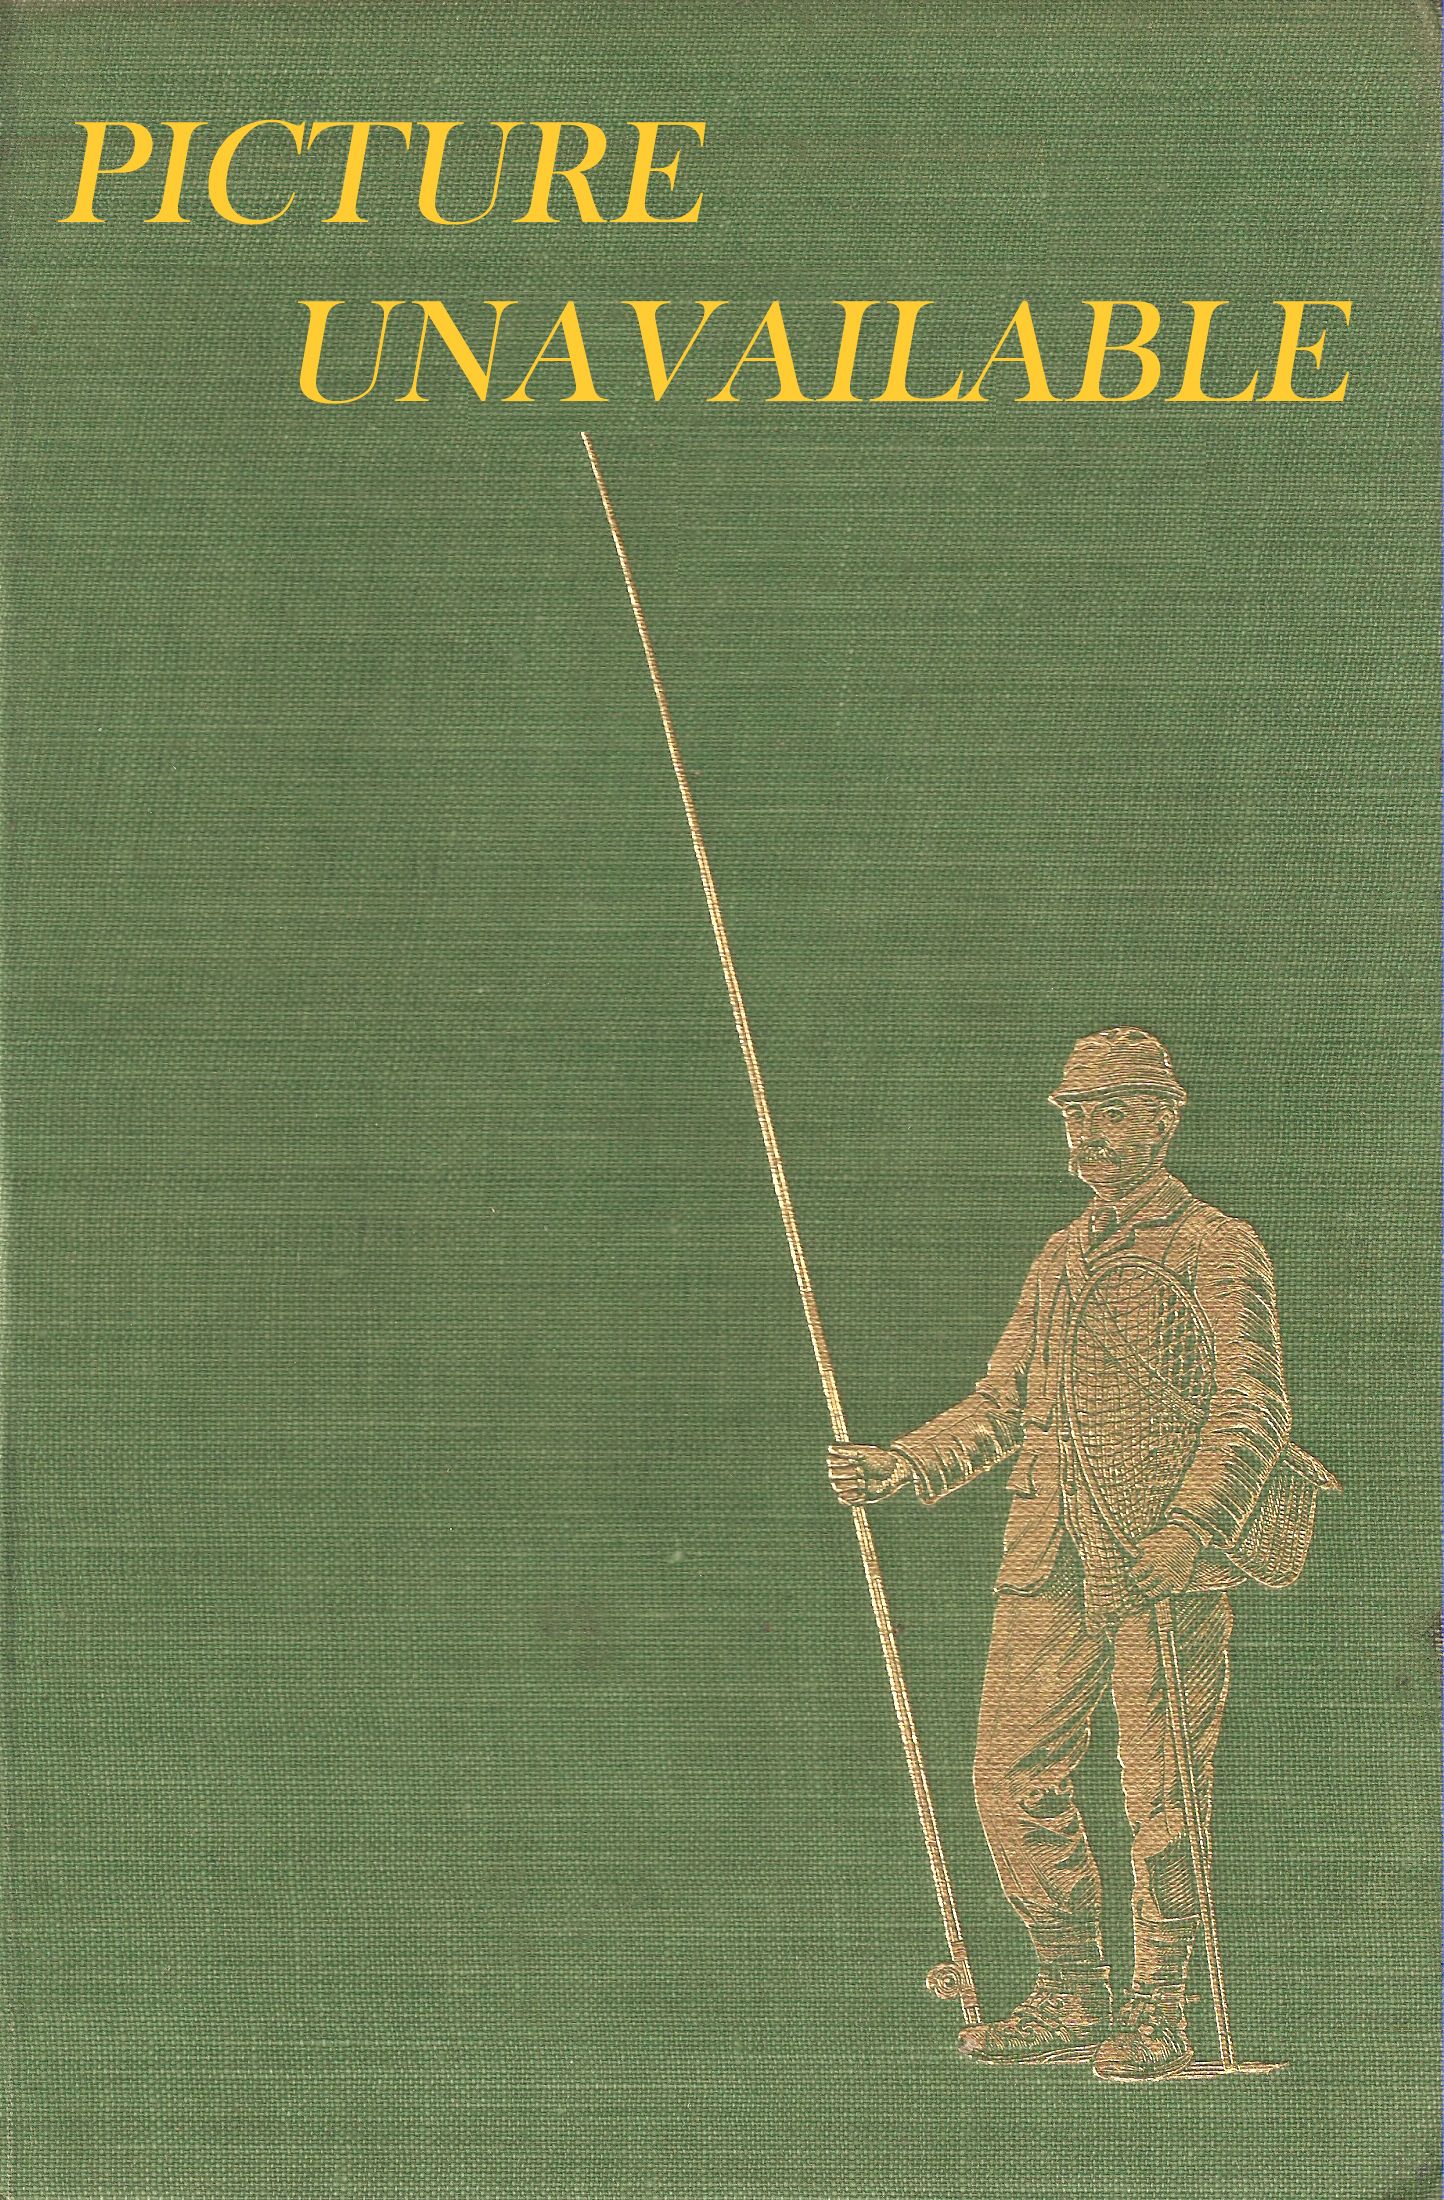 THE RAIL AND THE ROD; OR, TOURIST-ANGLER'S GUIDE TO WATERS AND QUARTERS. Parts 1-3 in one volume.